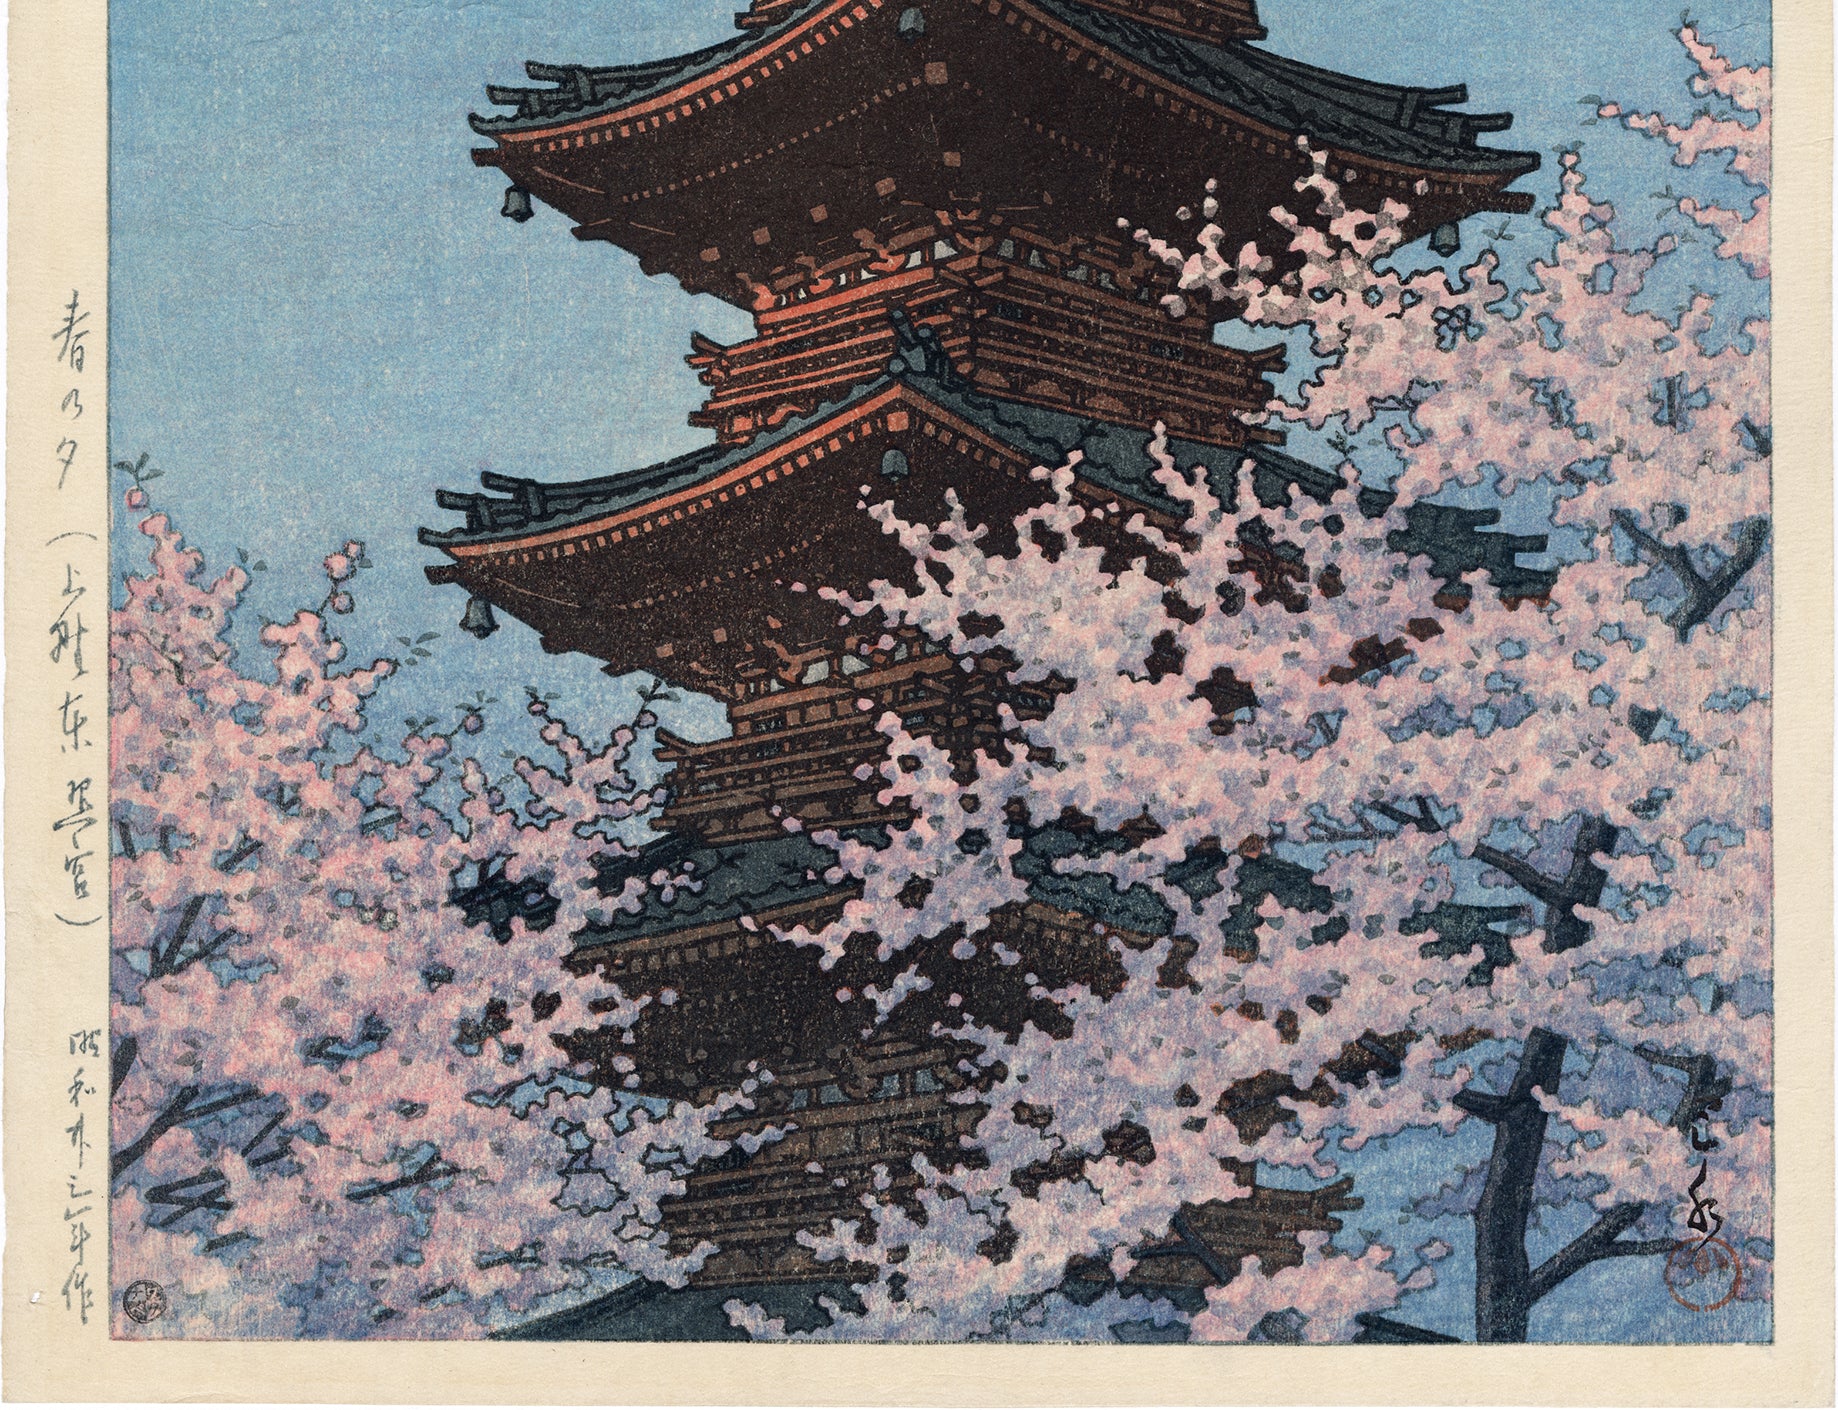 Hasui 川瀬巴水: Spring Dusk at the Tosho Shrine, Ueno (Sold 